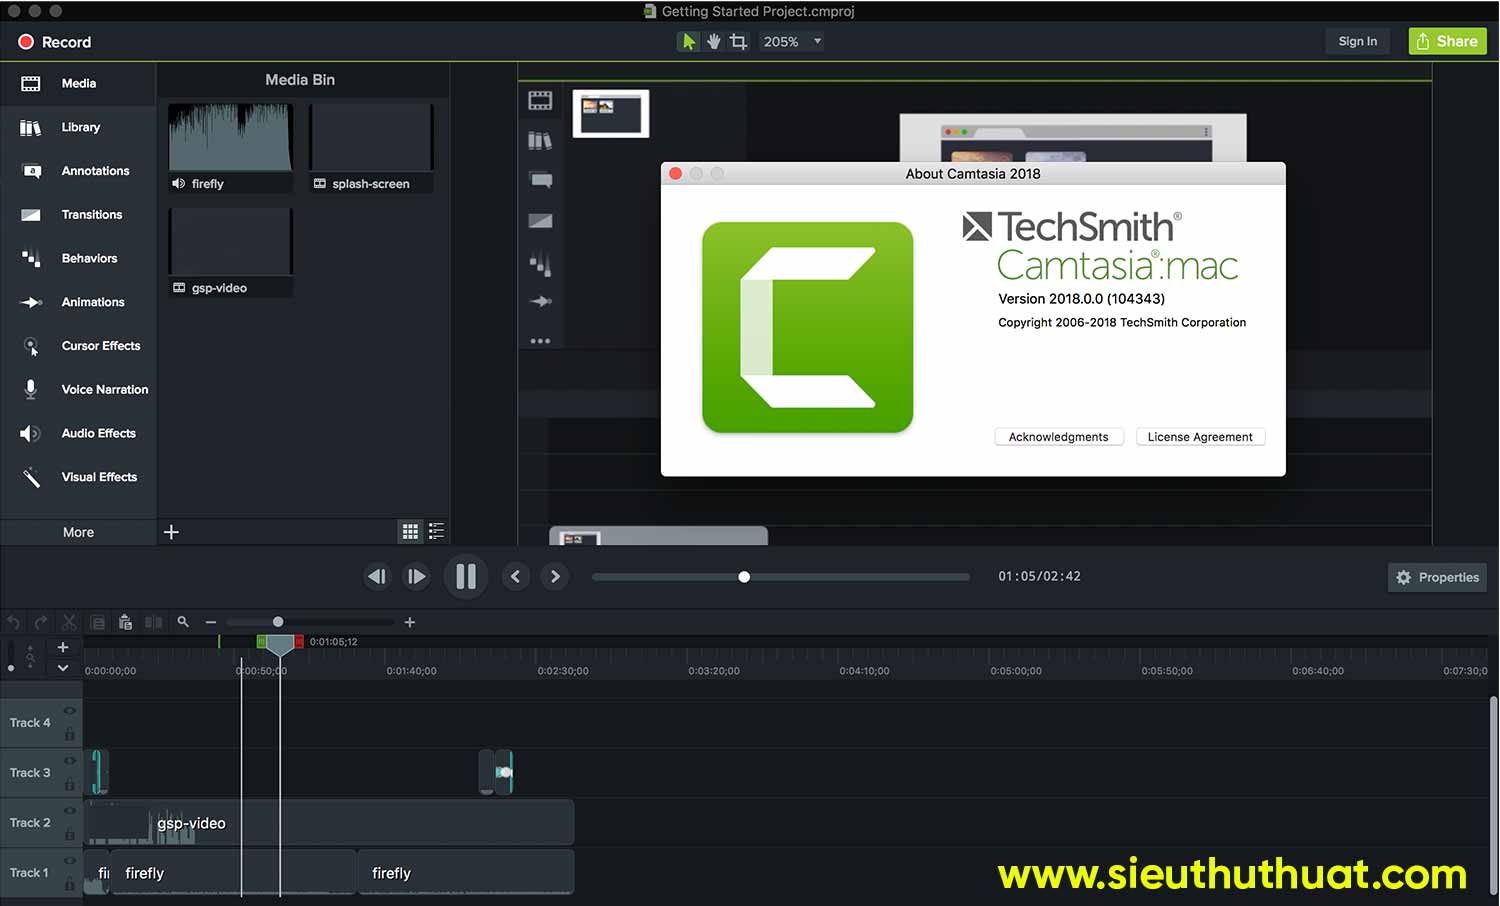 TechSmith Camtasia 23.1.1 instal the new version for apple